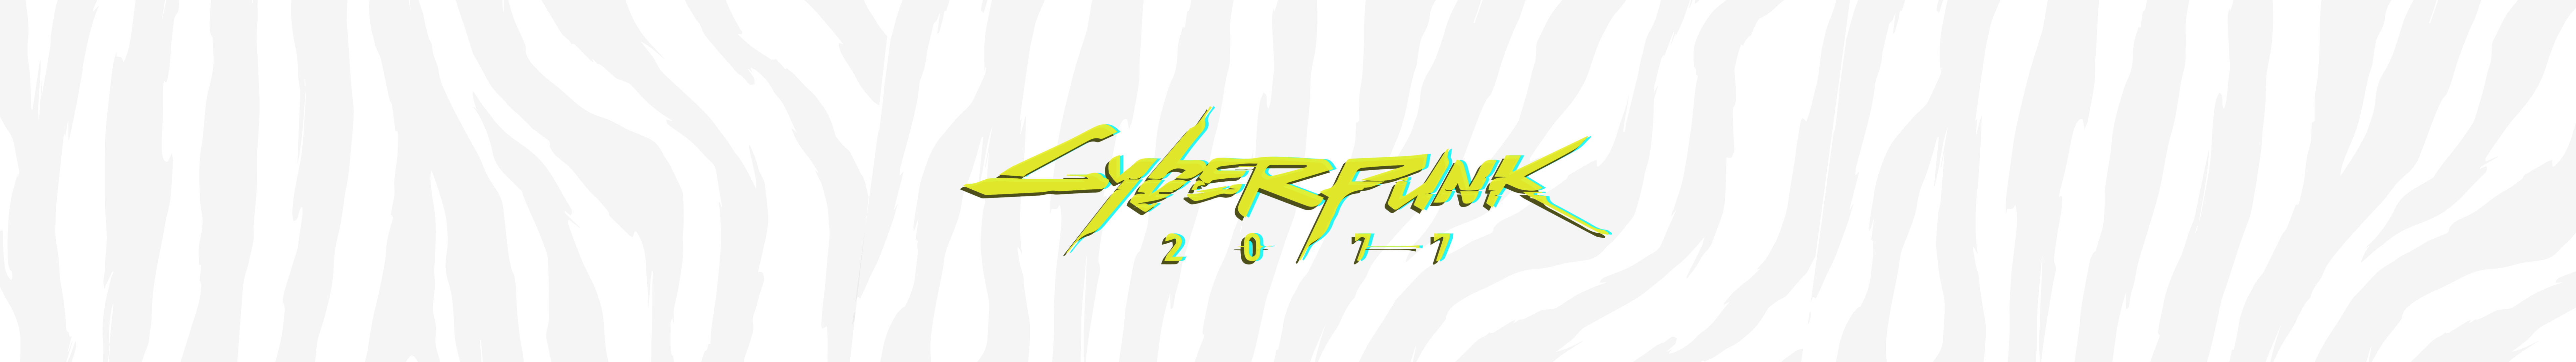 I made these Cyberpunk 2077 wallpaper because I couldn't find any